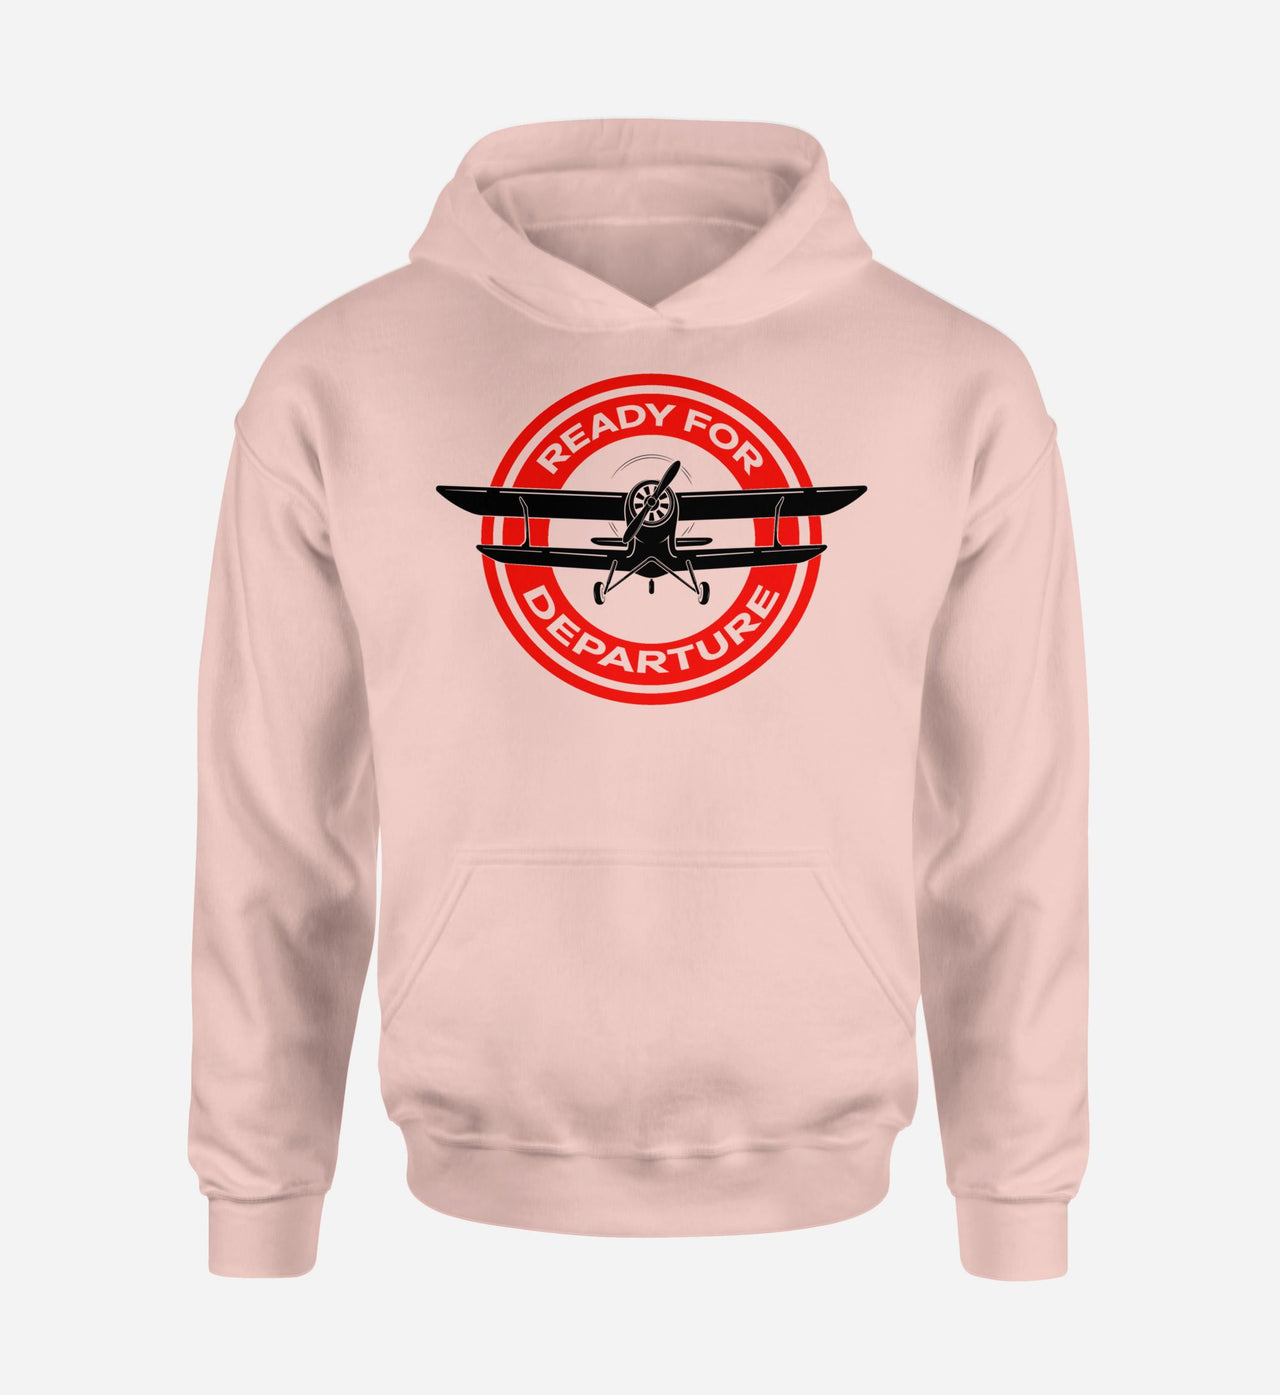 Ready for Departure Designed Hoodies